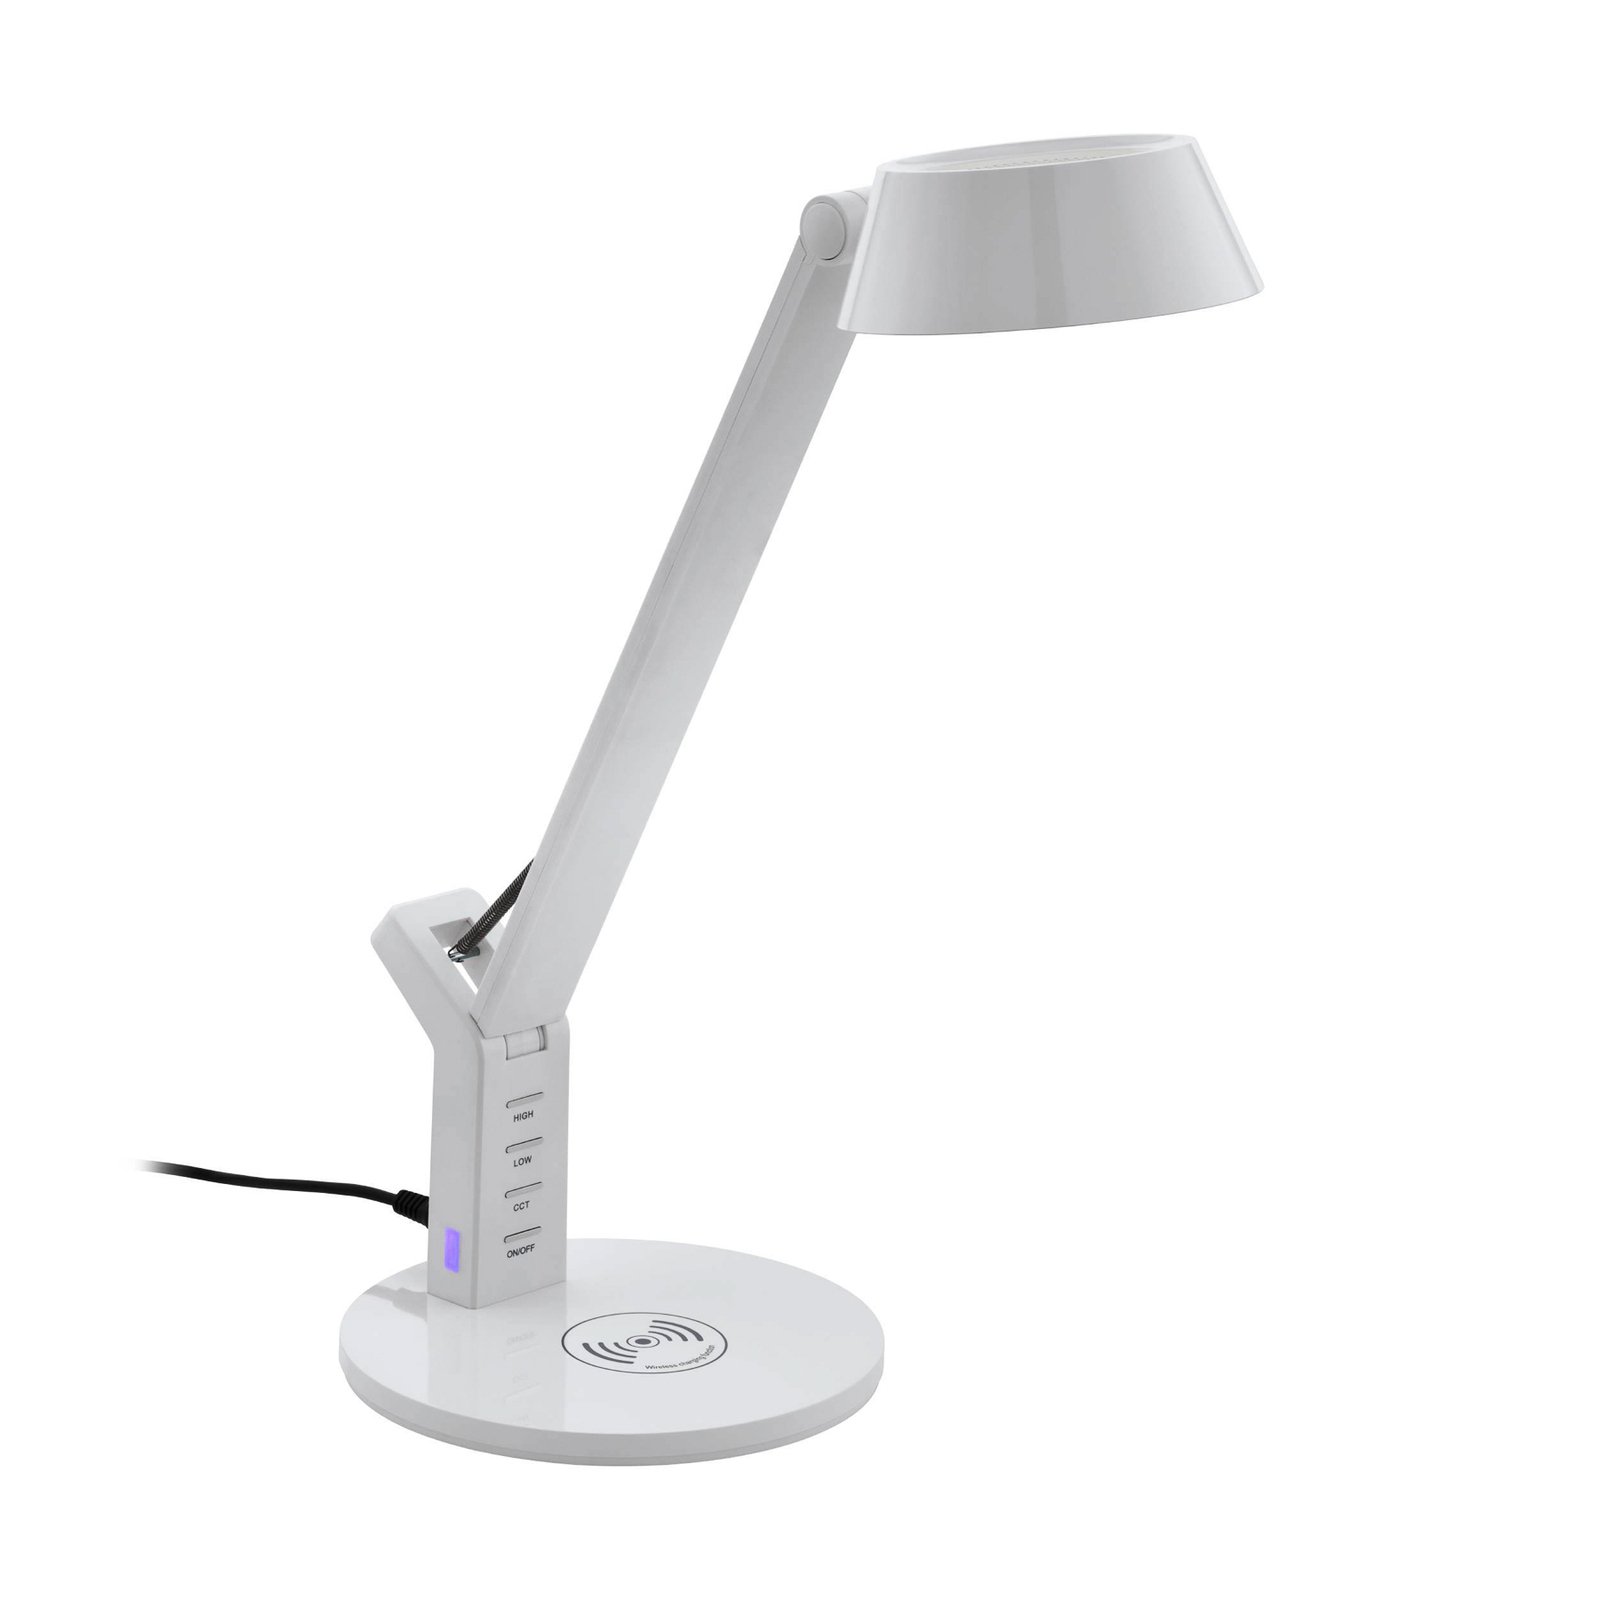 LED-Tischlampe Banderalo CCT dimmbar QI weiß